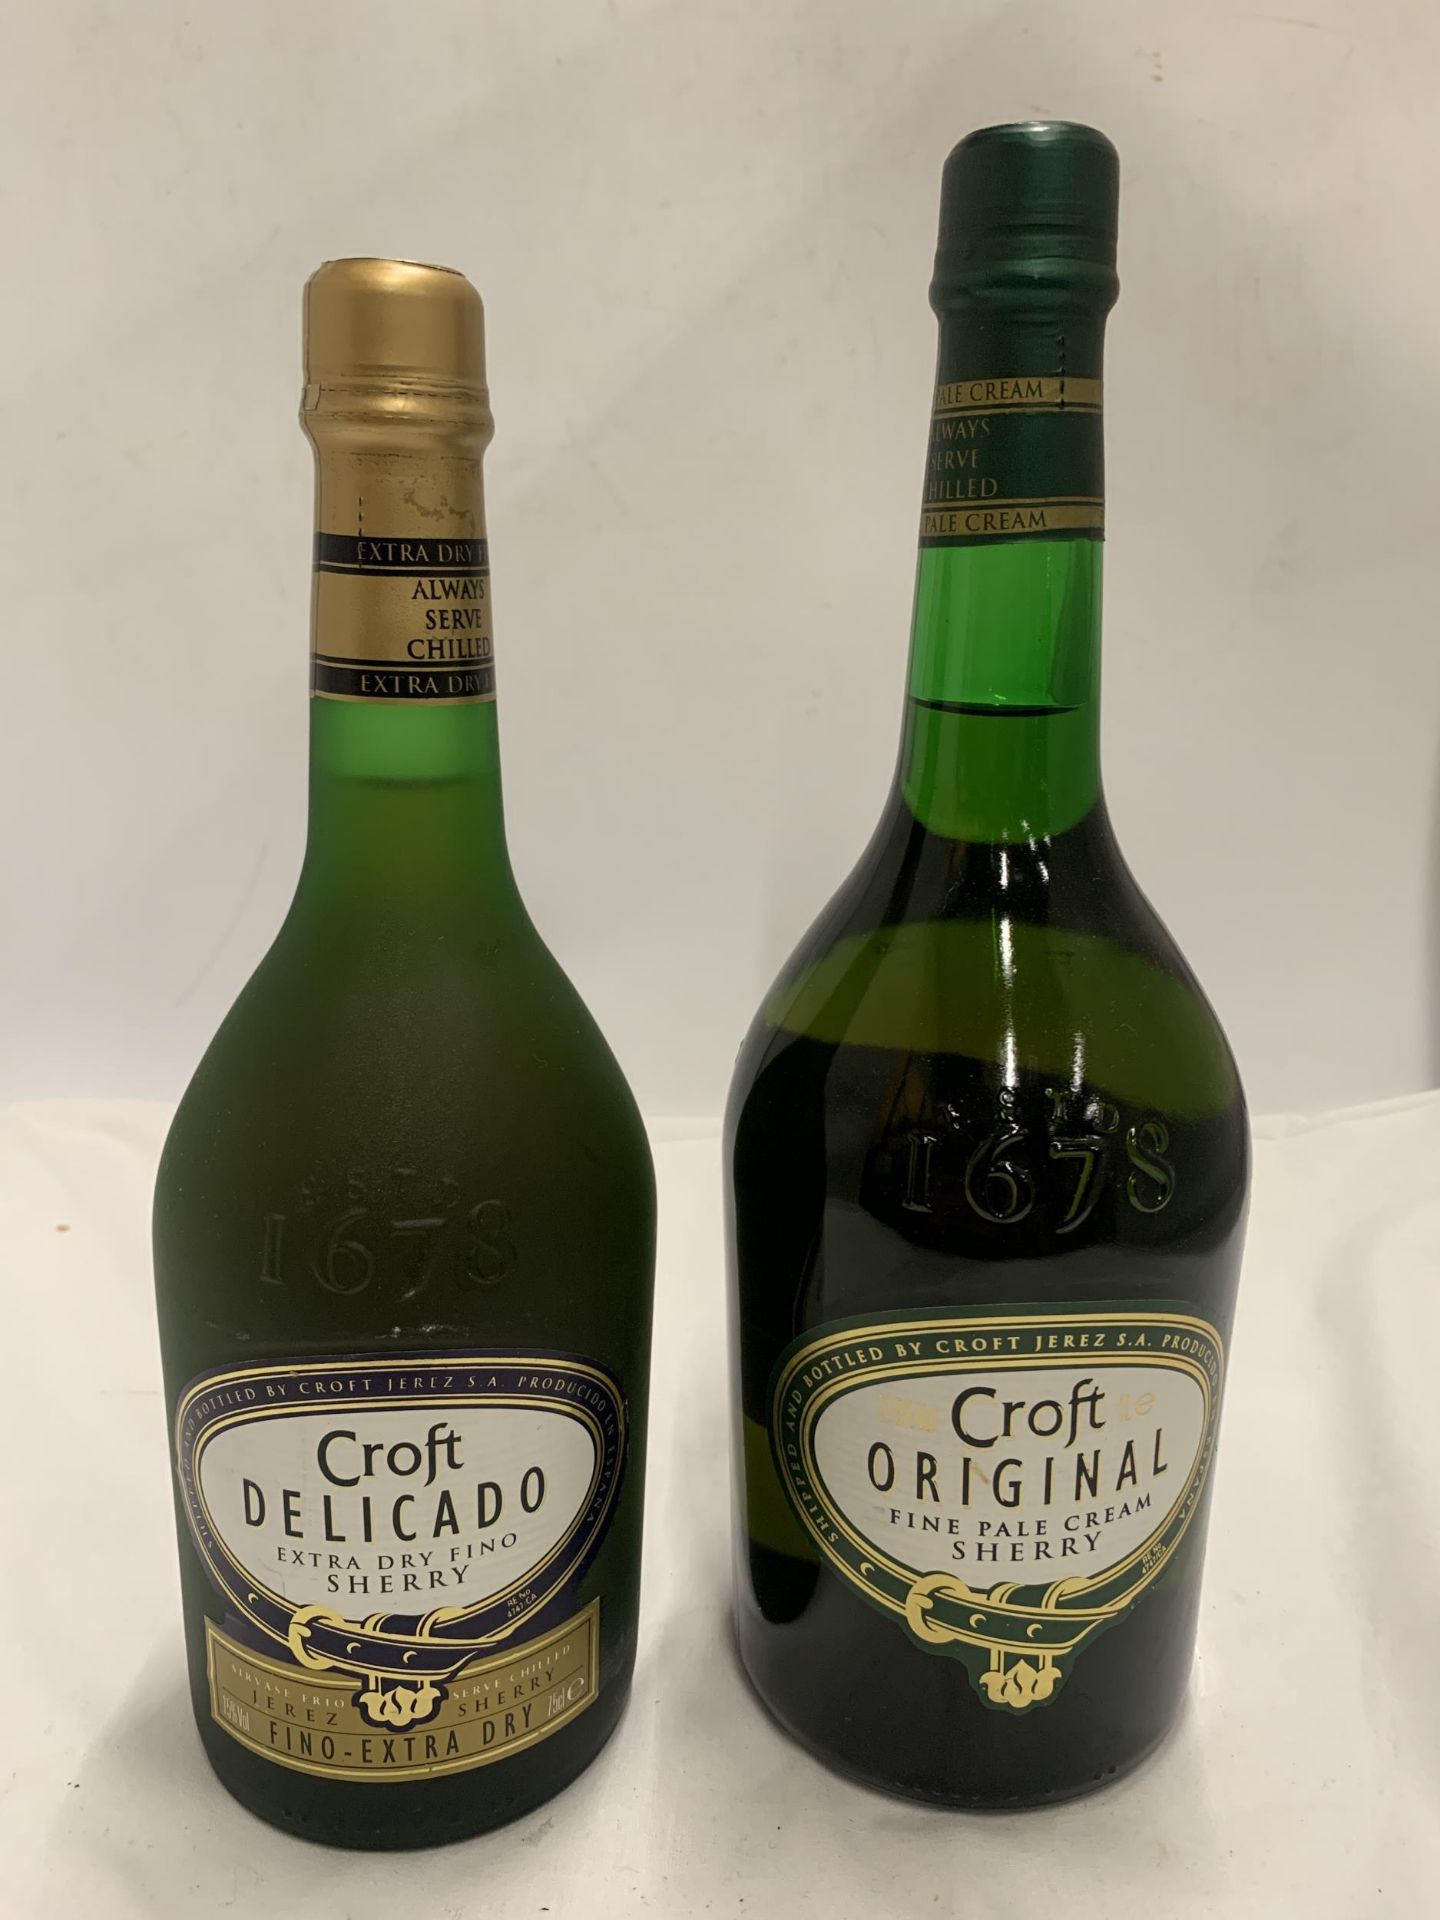 TWO 75CL BOTTLES - CROFT ORIGINAL PALE CREAM SHERRY AND DELICADO EXTRA DRY SHERRY